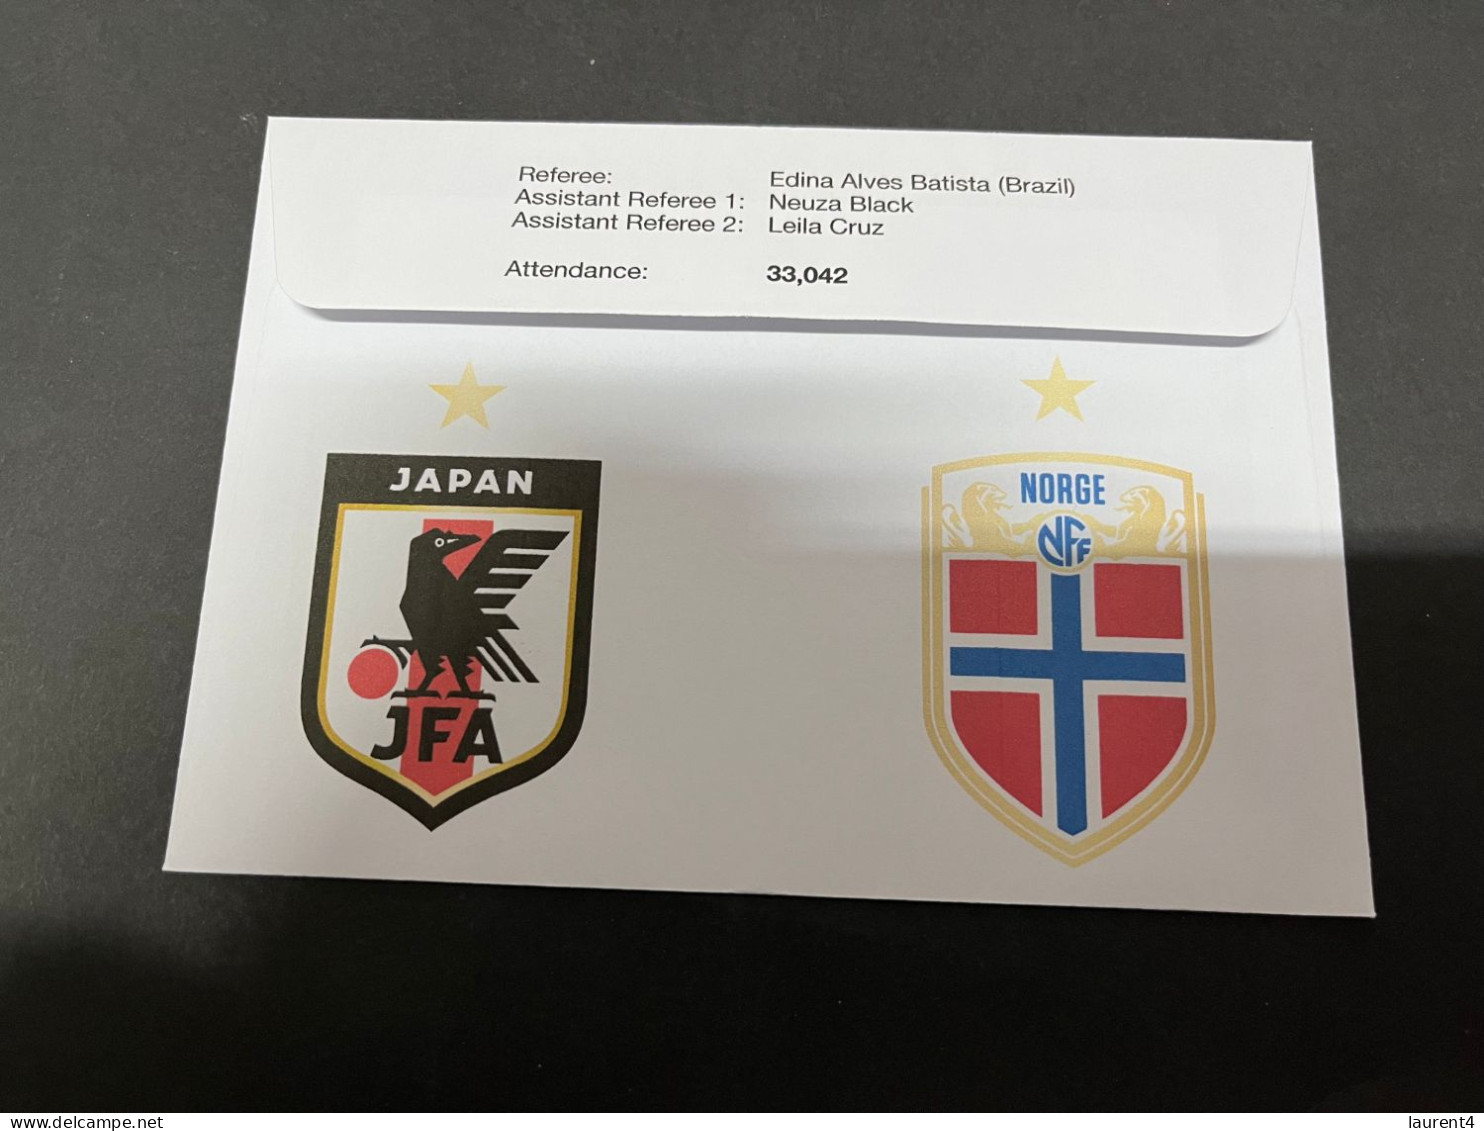 6-8-2023 (1 T 37) FIFA Women's Football World Cup Match 50 (stamp + $ 2.00 Coin) Japan (3) V Norway (1) - 2 Dollars